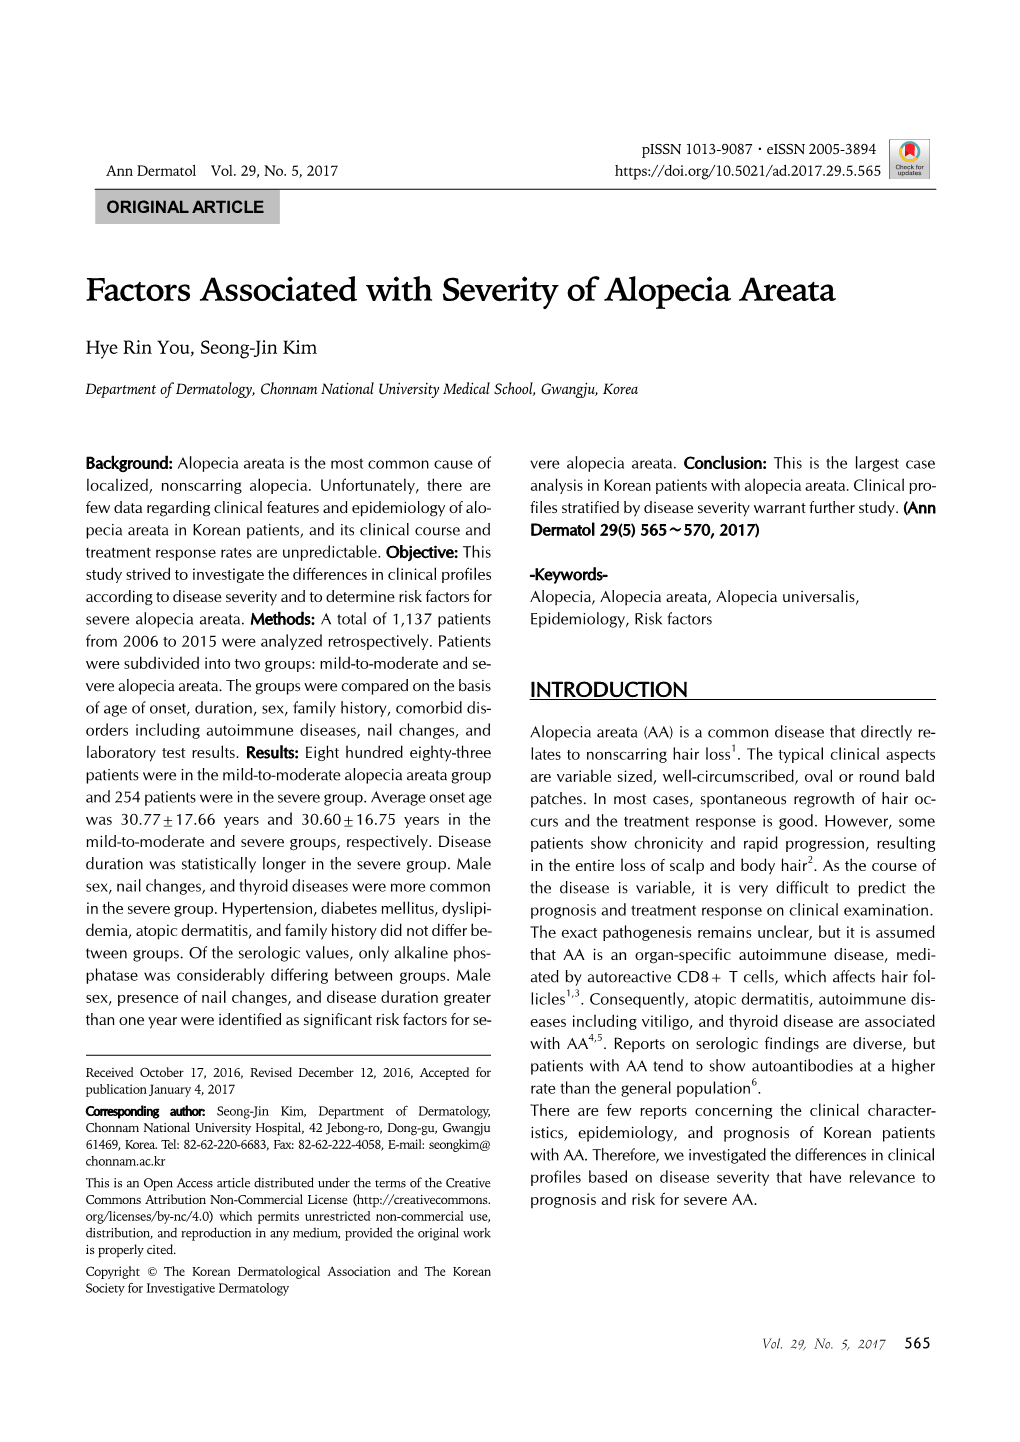 Factors Associated with Severity of Alopecia Areata